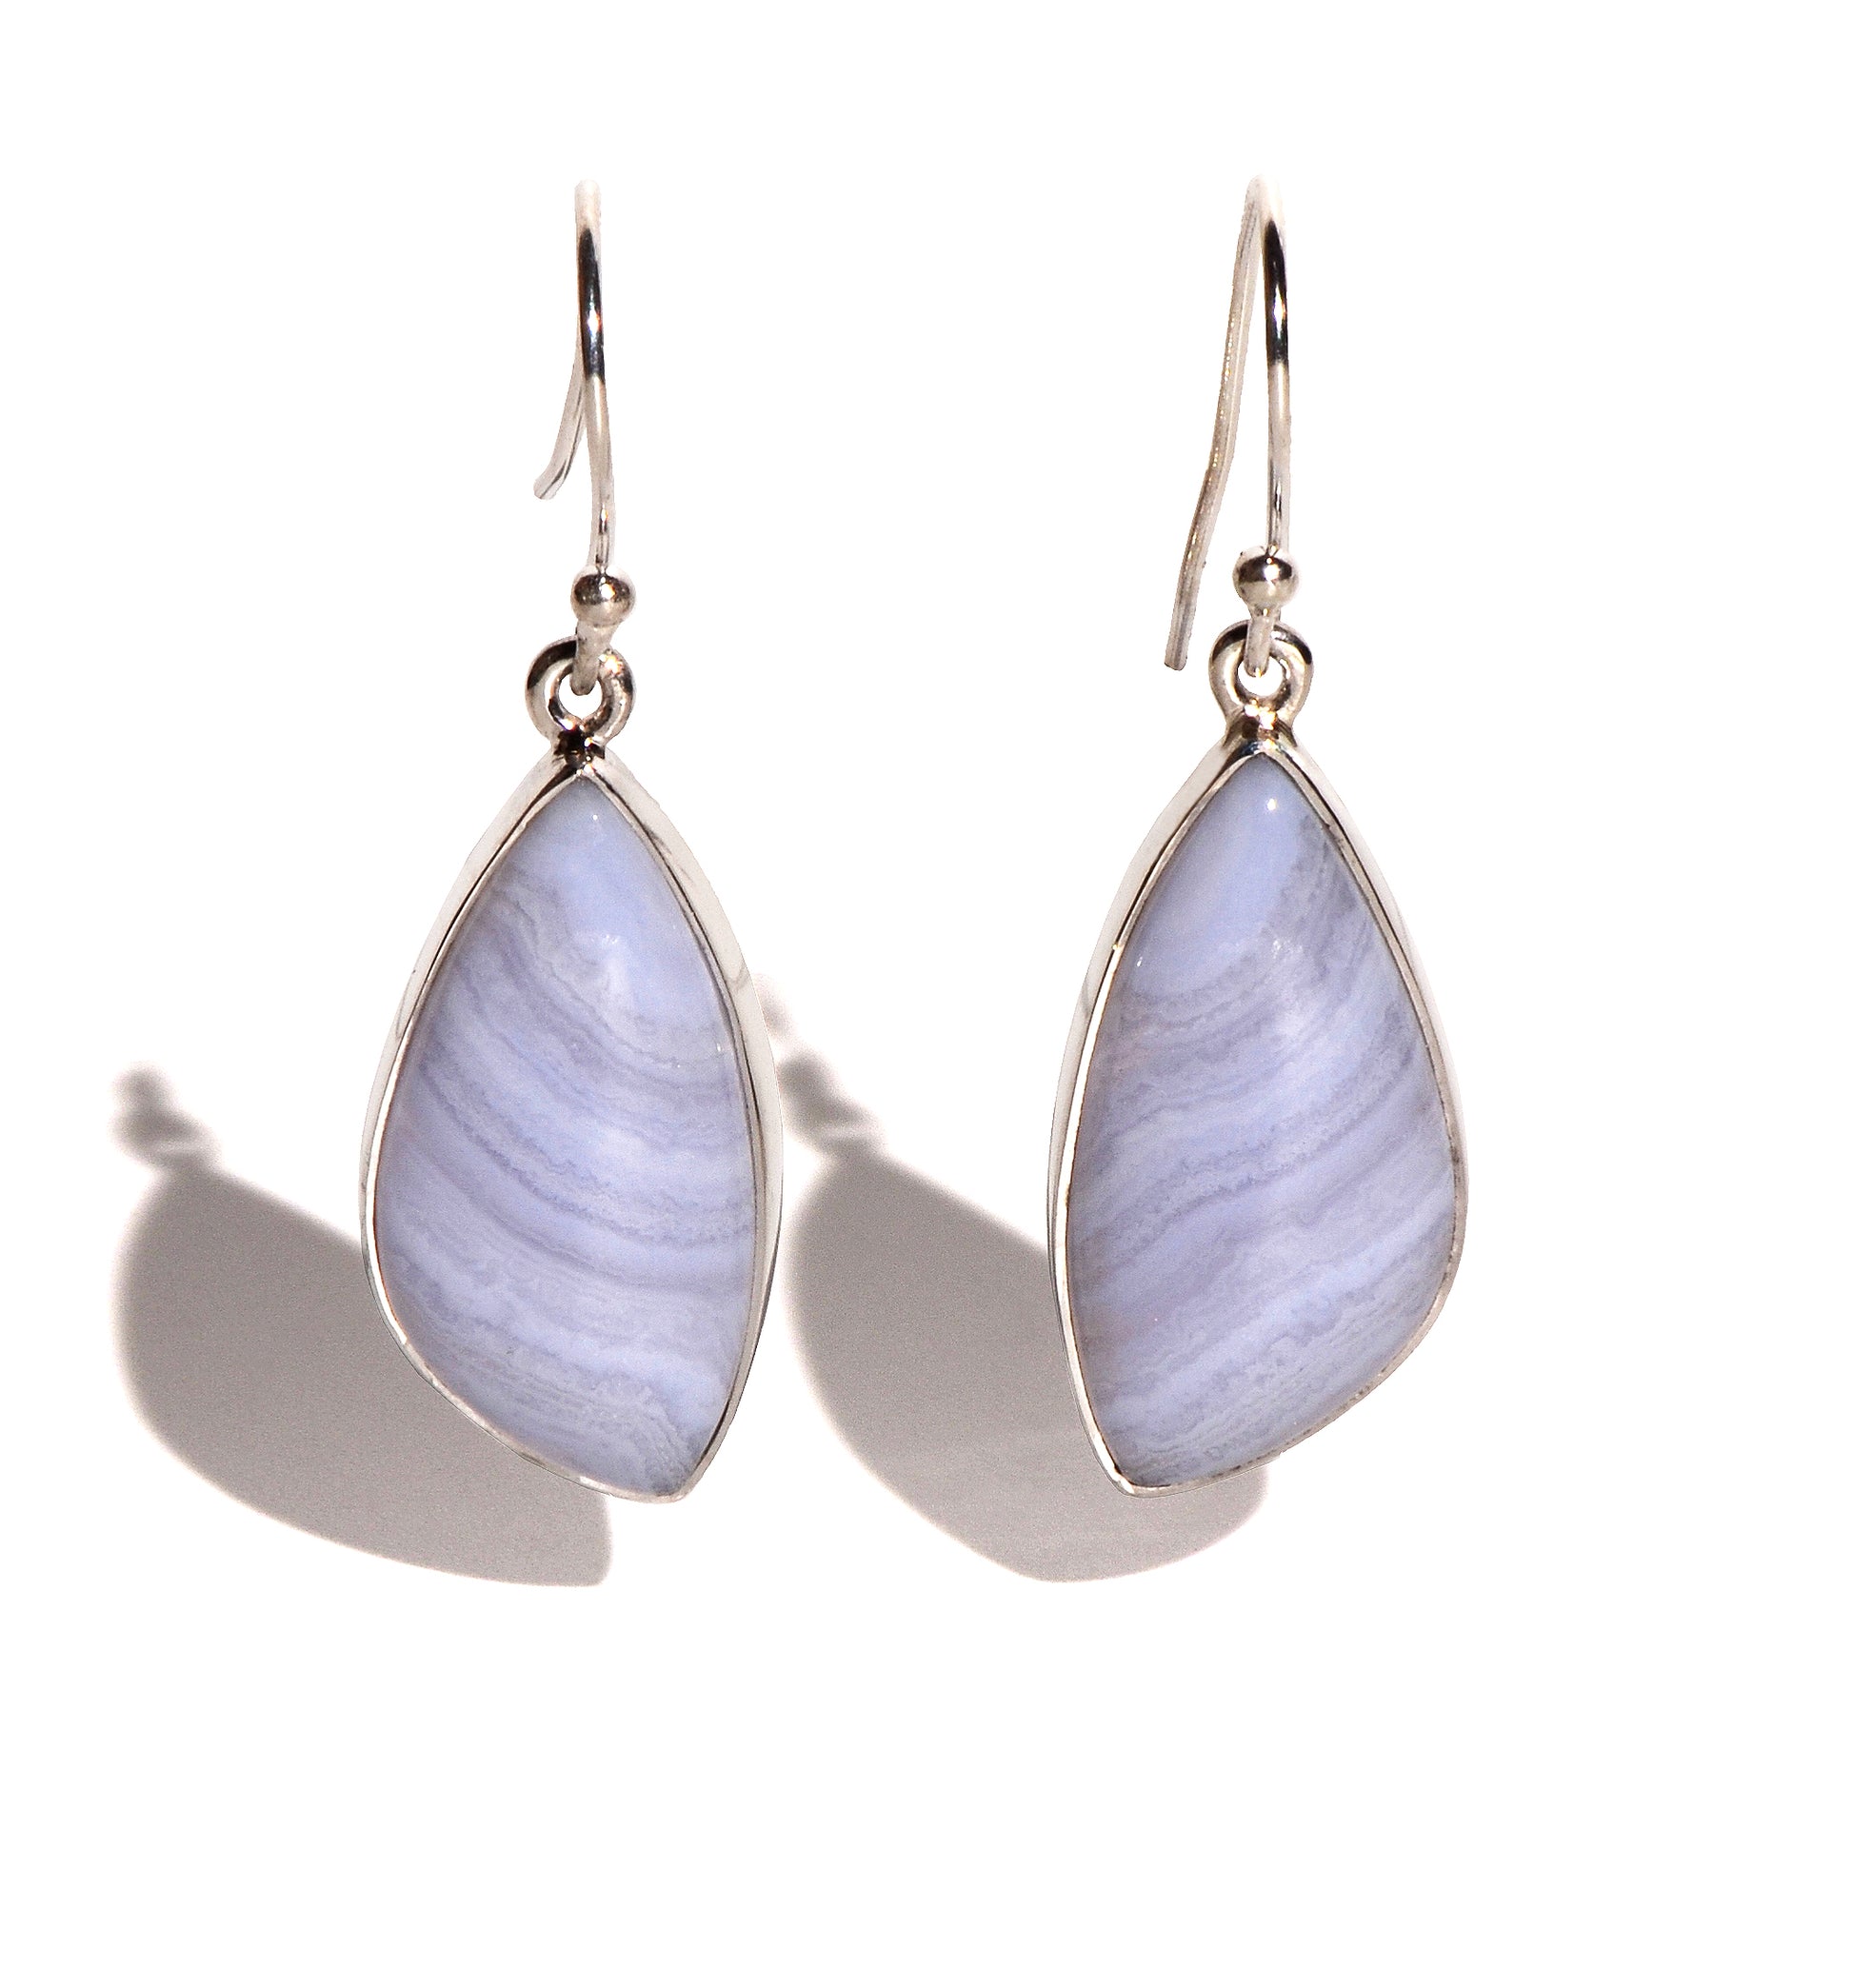 Blue Lace Agate Sterling Silver Earrings - Free Form